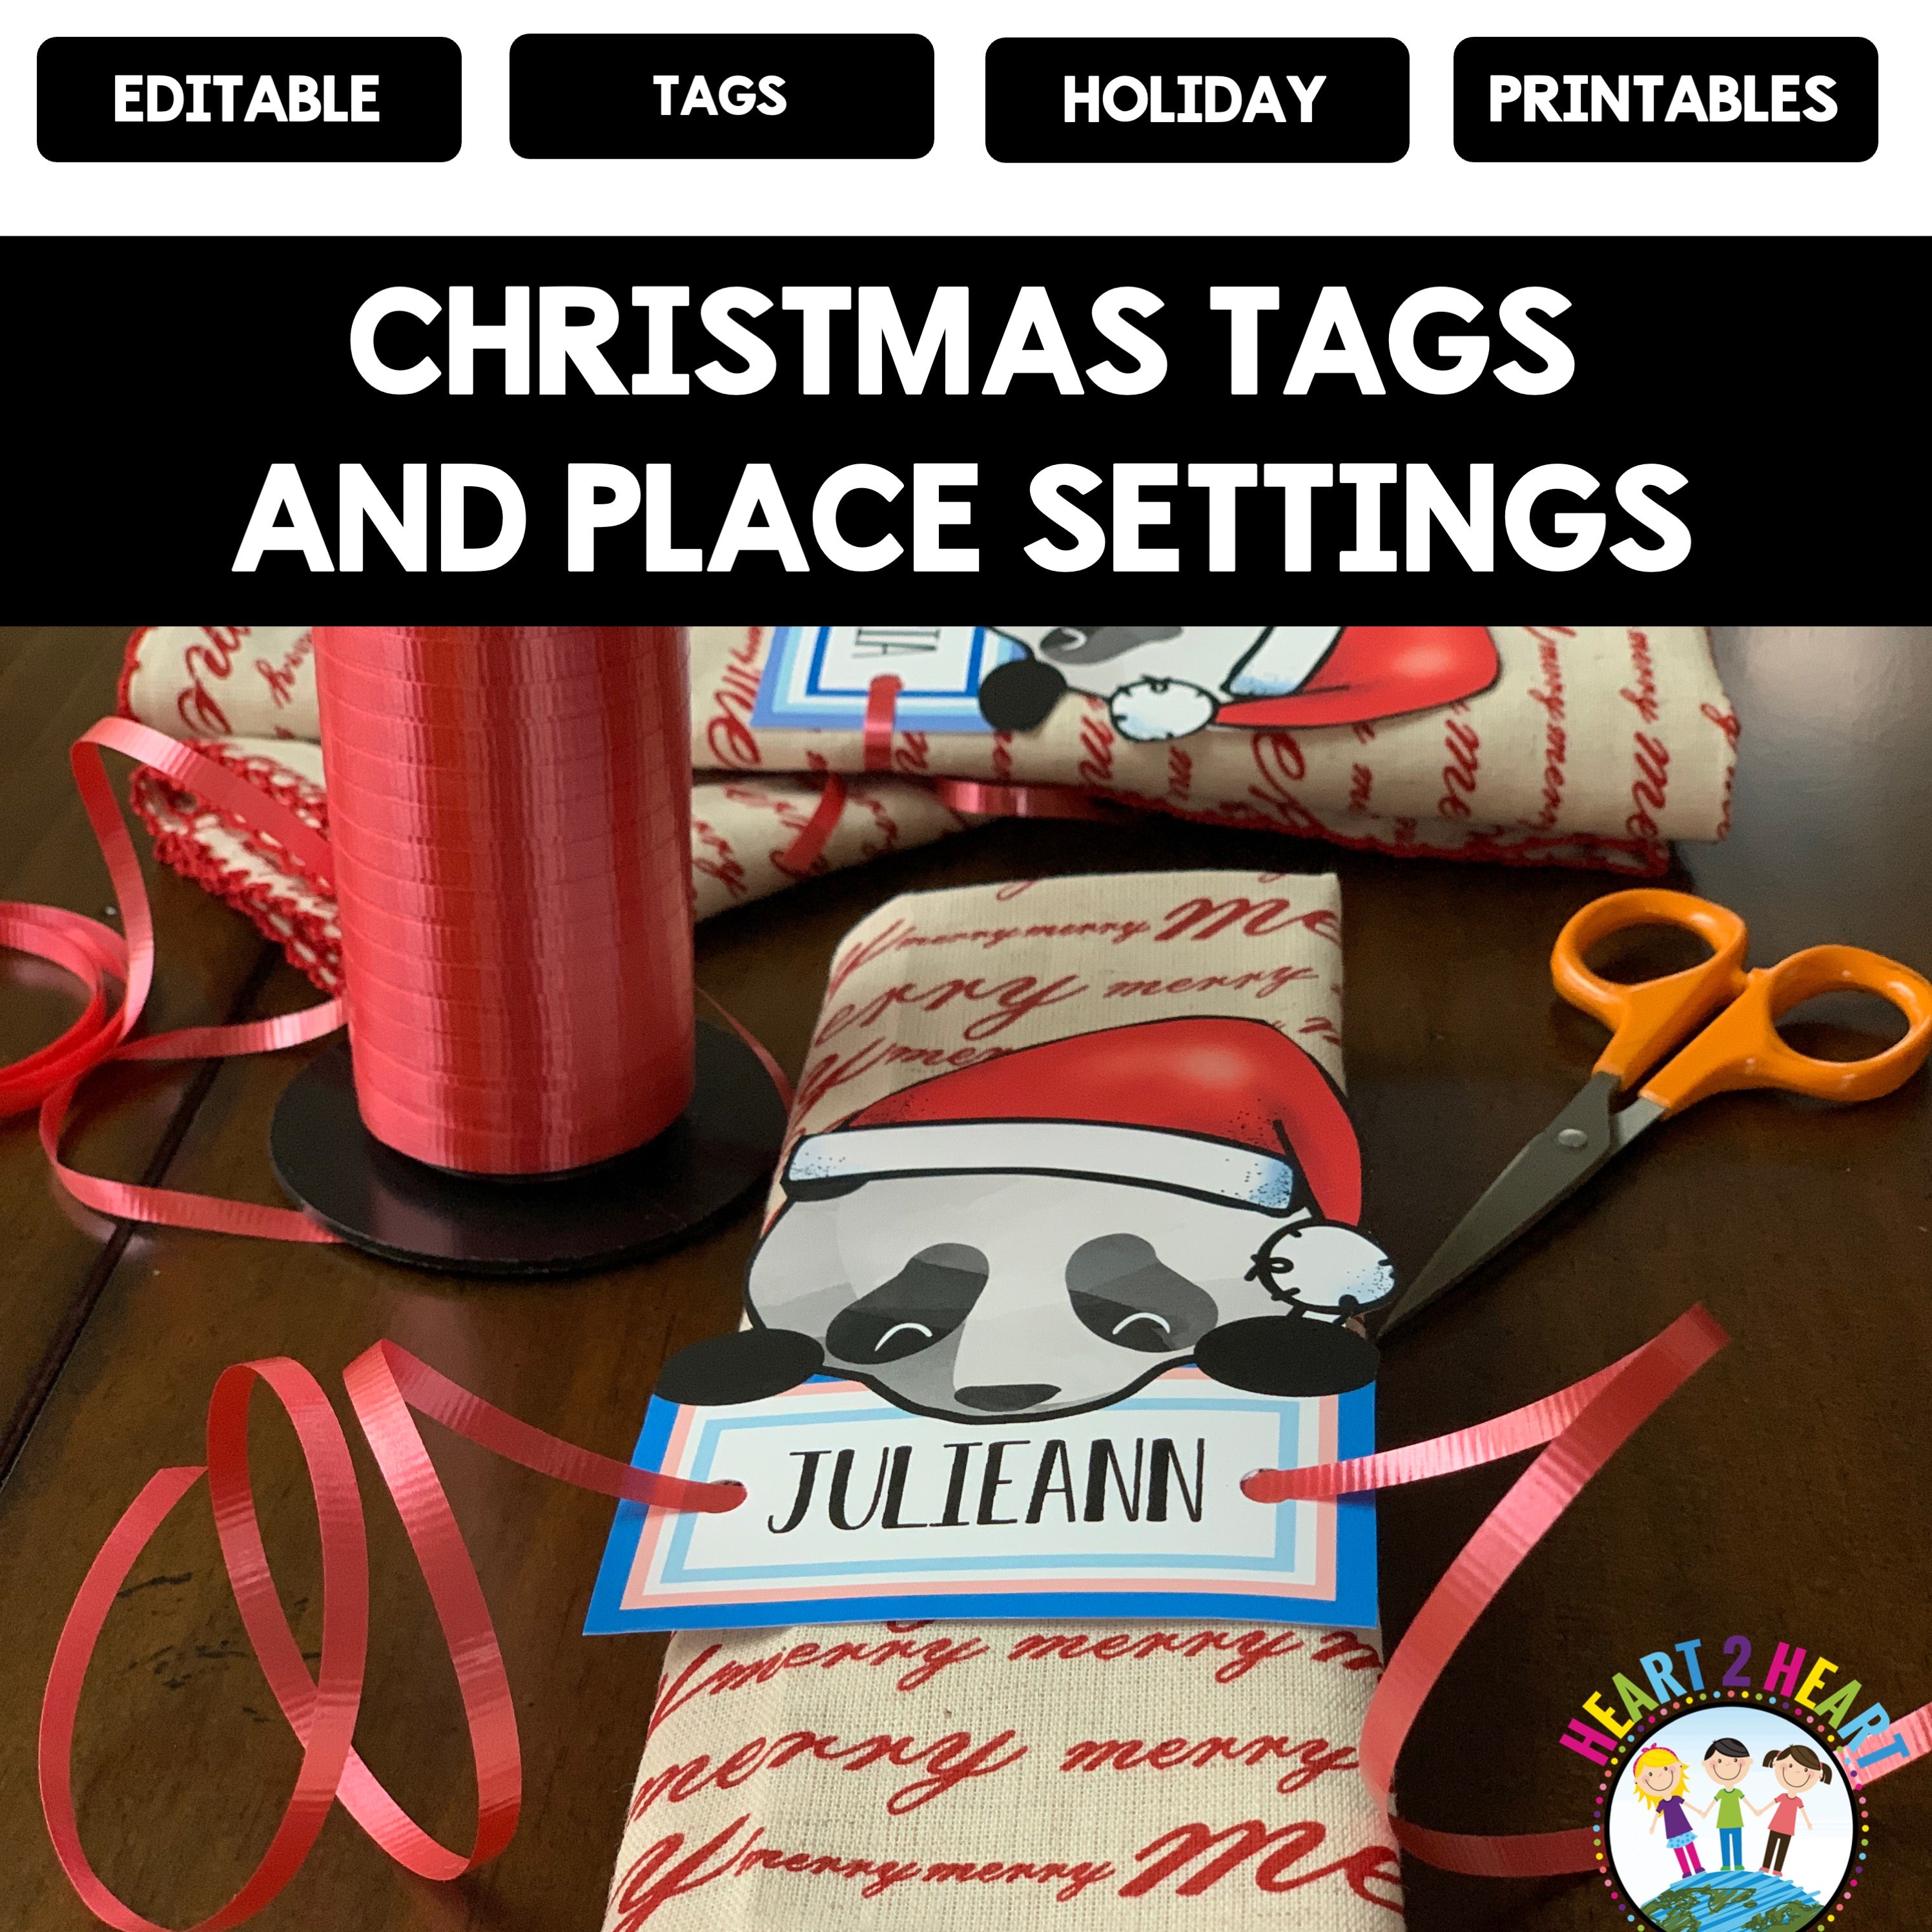 13 Unique and Festive DIY Gift Tags to Spice Up Your Christmas Presents